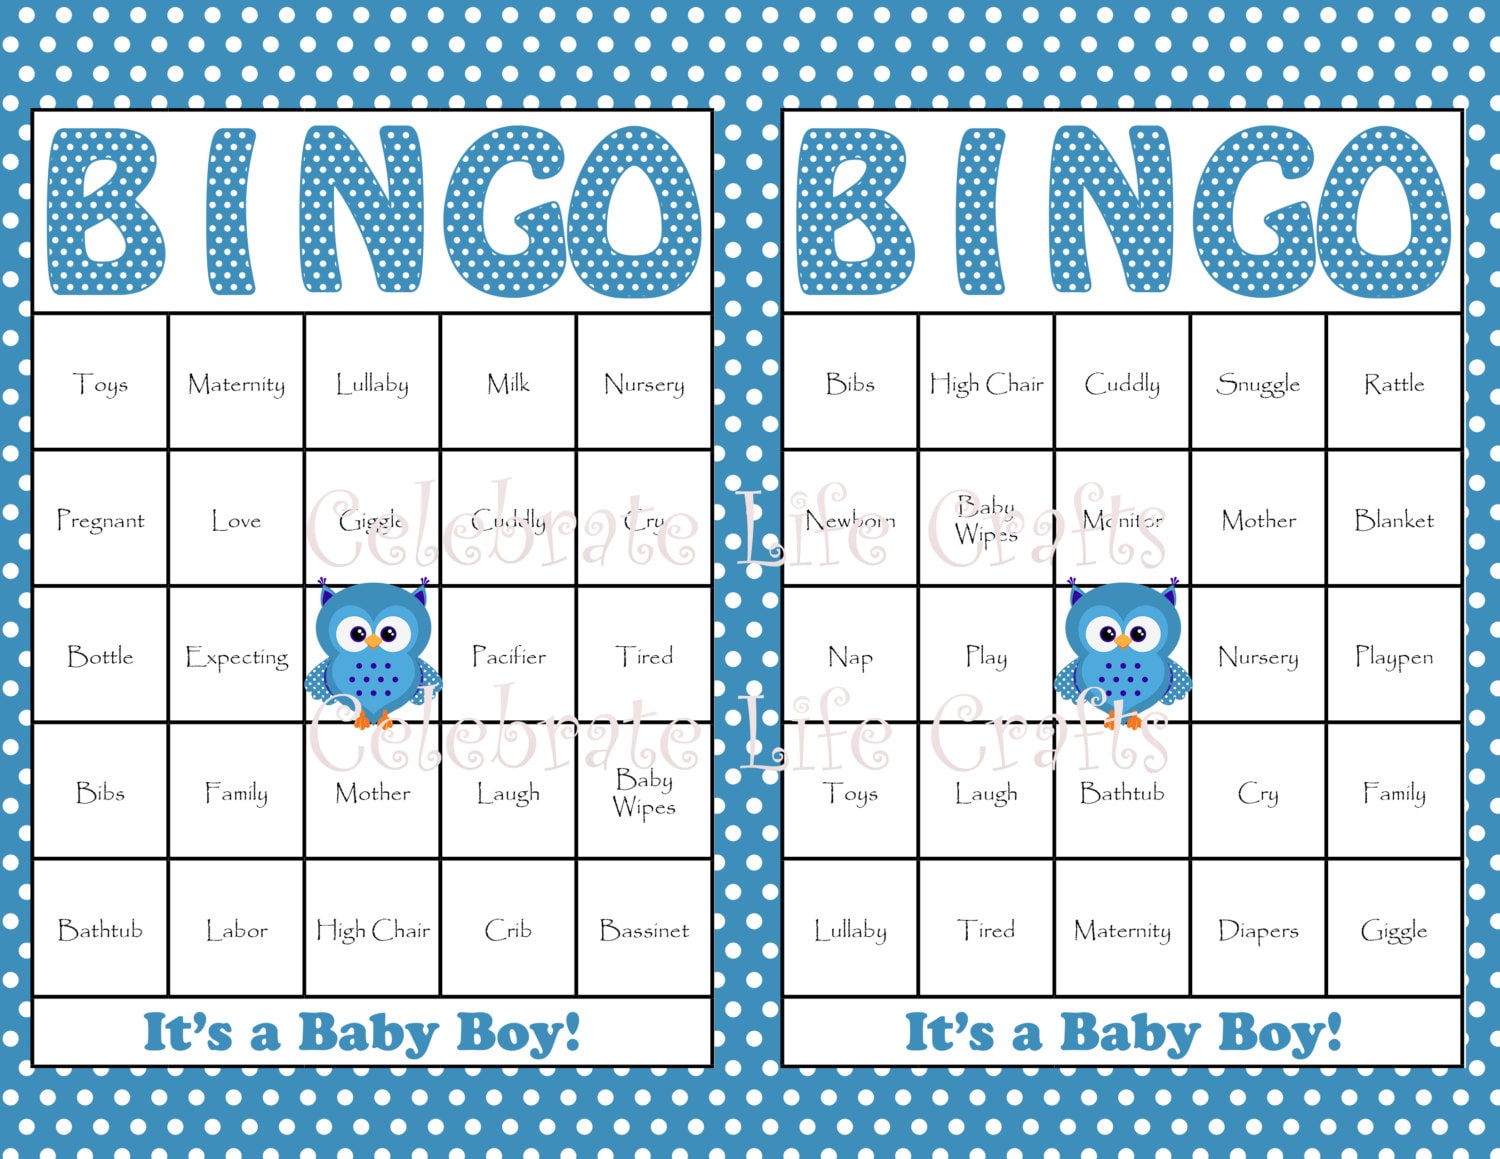 30 Baby Shower Bingo Cards Printable Party by CelebrateLifeCrafts